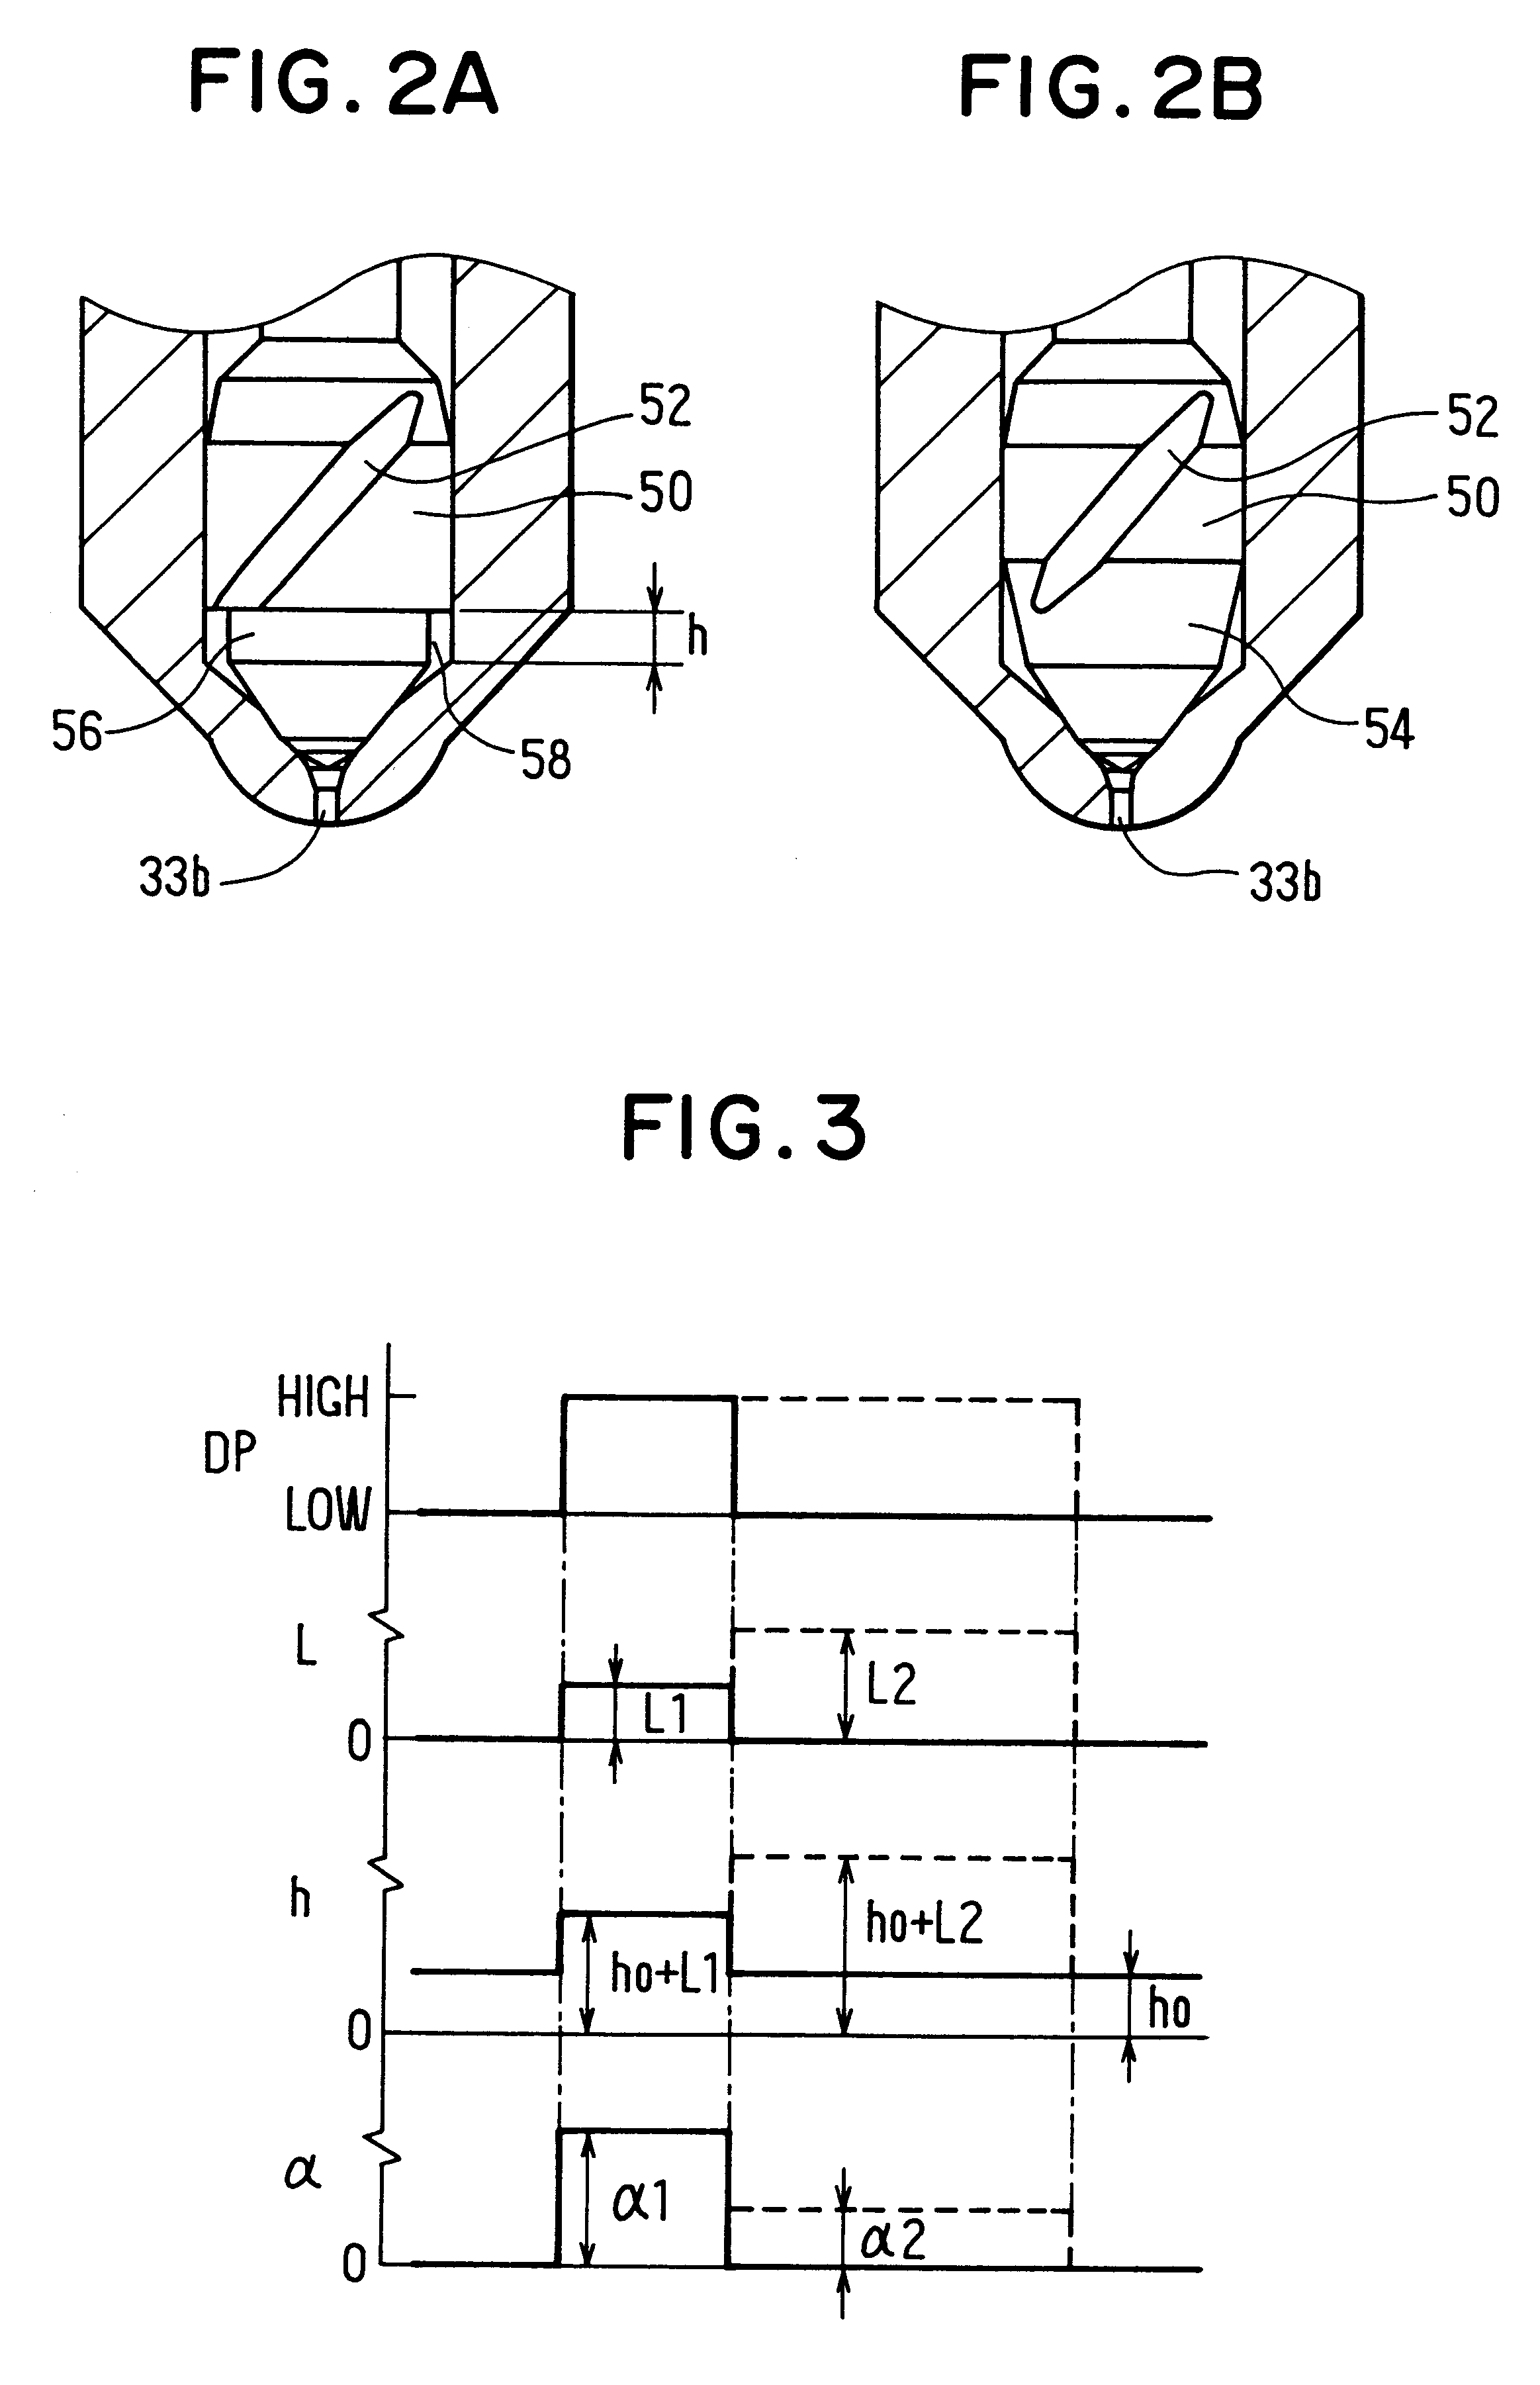 Fuel injection system having pre-injection and main injection